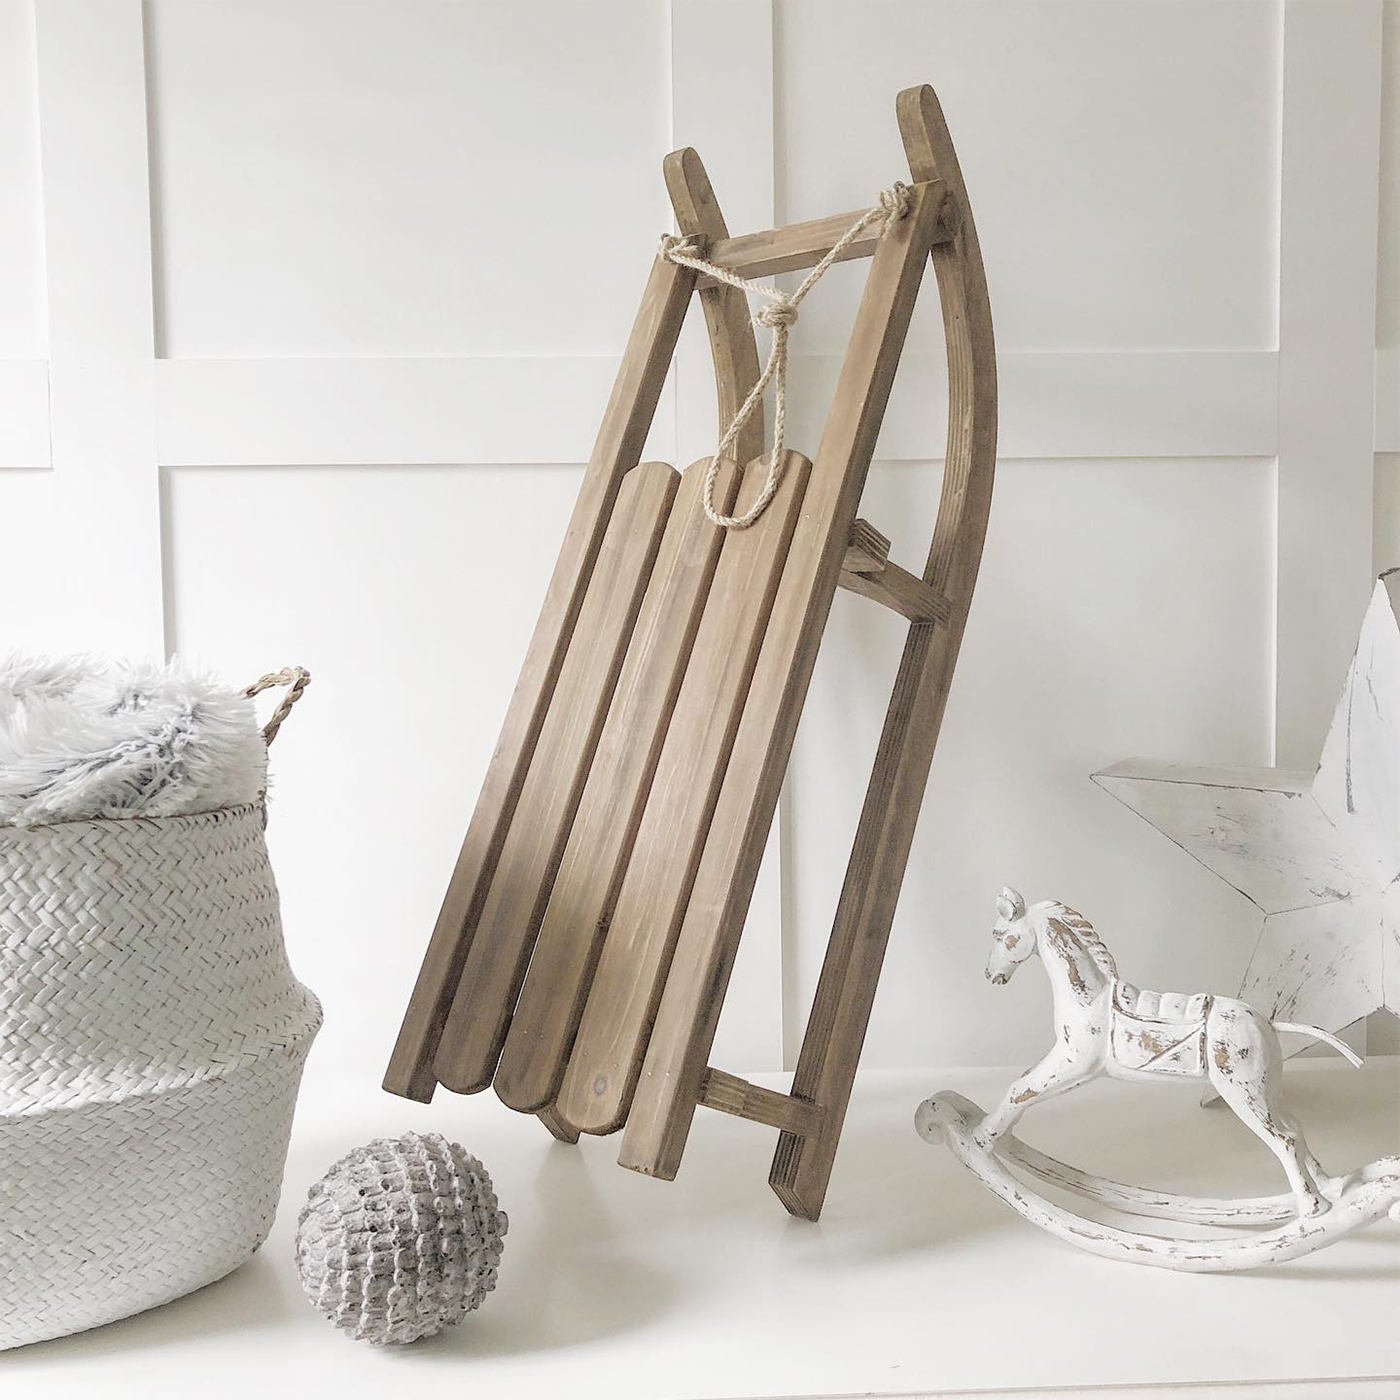 A gorgeous decorative wooden sleigh for elegant Christmas decorations. An absolutely beautiful festive decoration in such a timeless style that will last for many years to come, creating many magical memories from The White Lighthouse Furniture in New England , Country Coastal and City home interiors and furniture